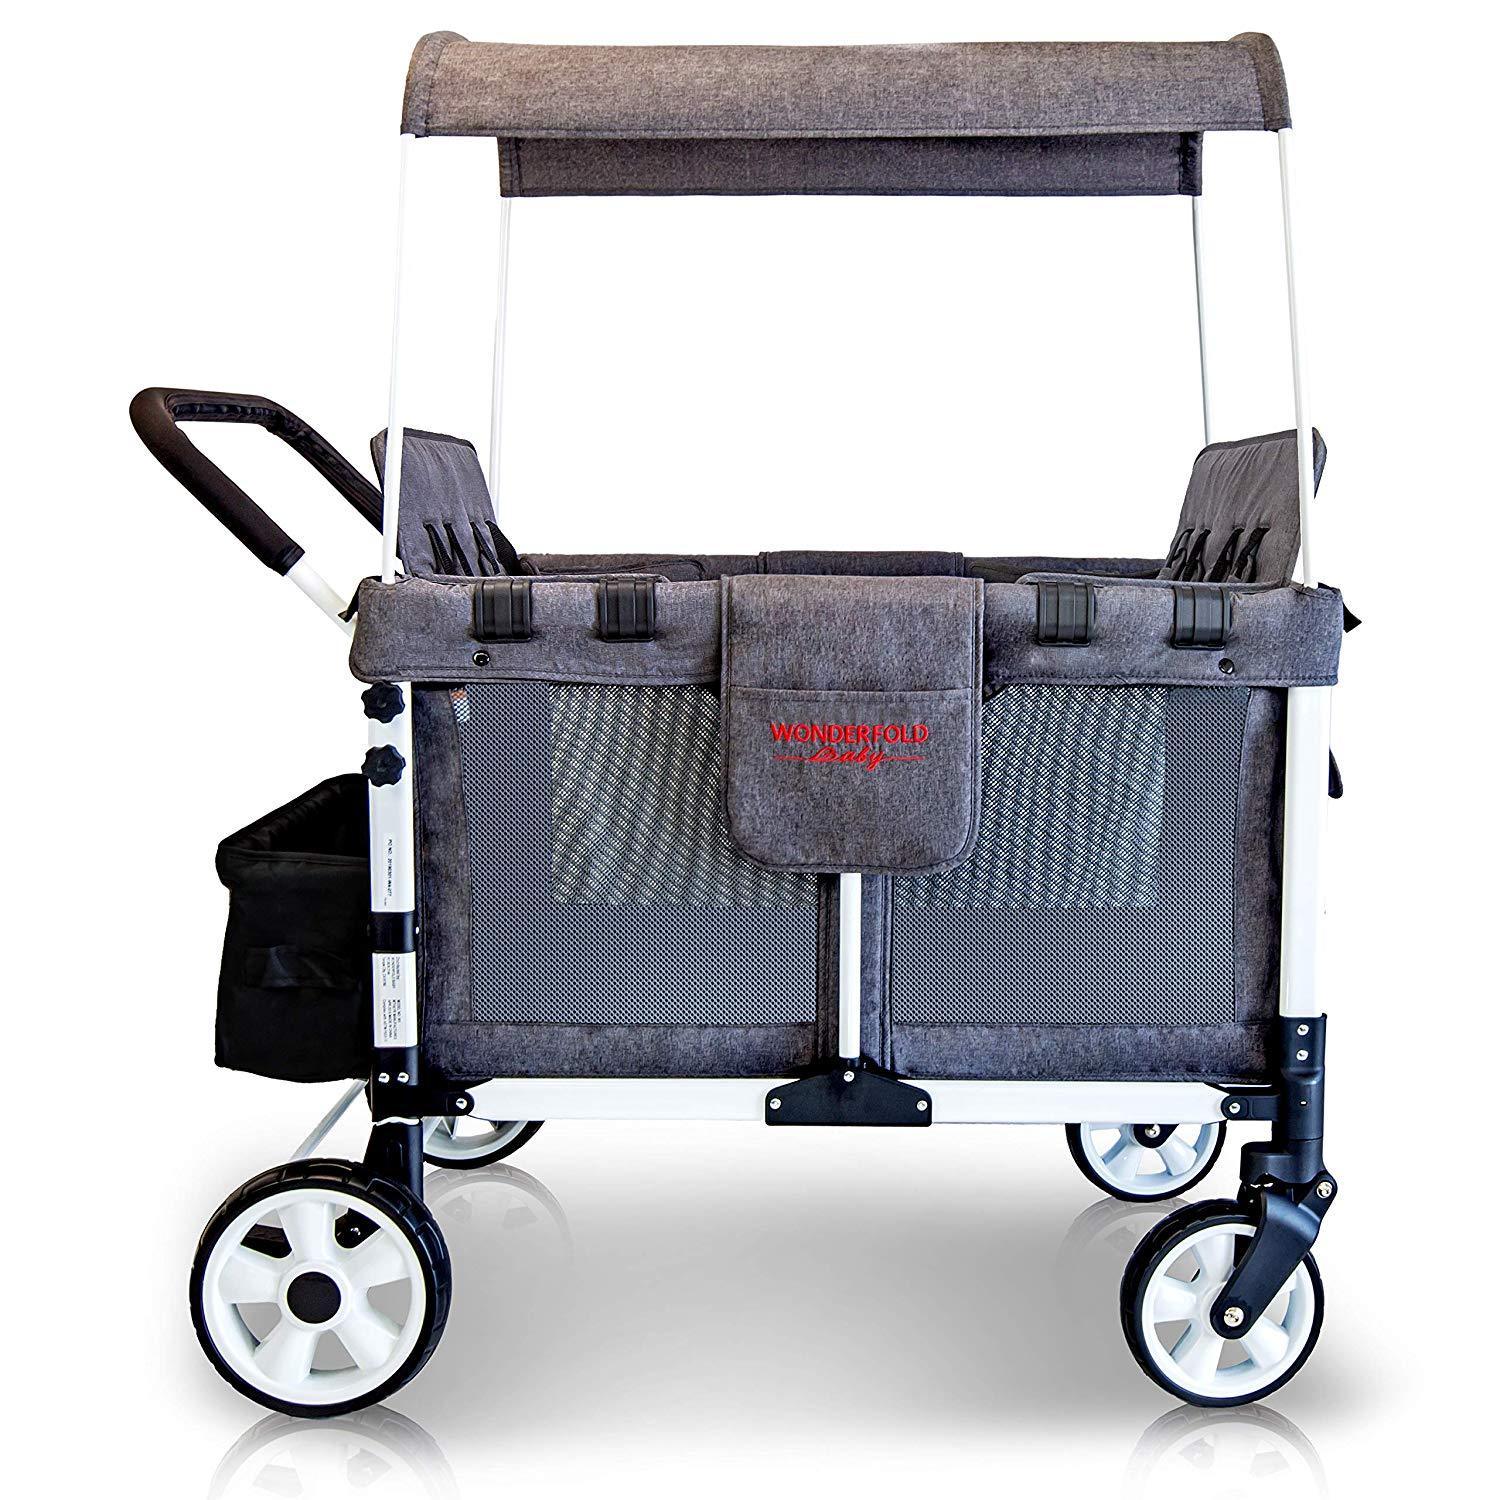 WonderFold Baby, WonderFold Baby Multi-Function Folding Quad Stroller Wagon with Removable Canopy and Seats Gray Used